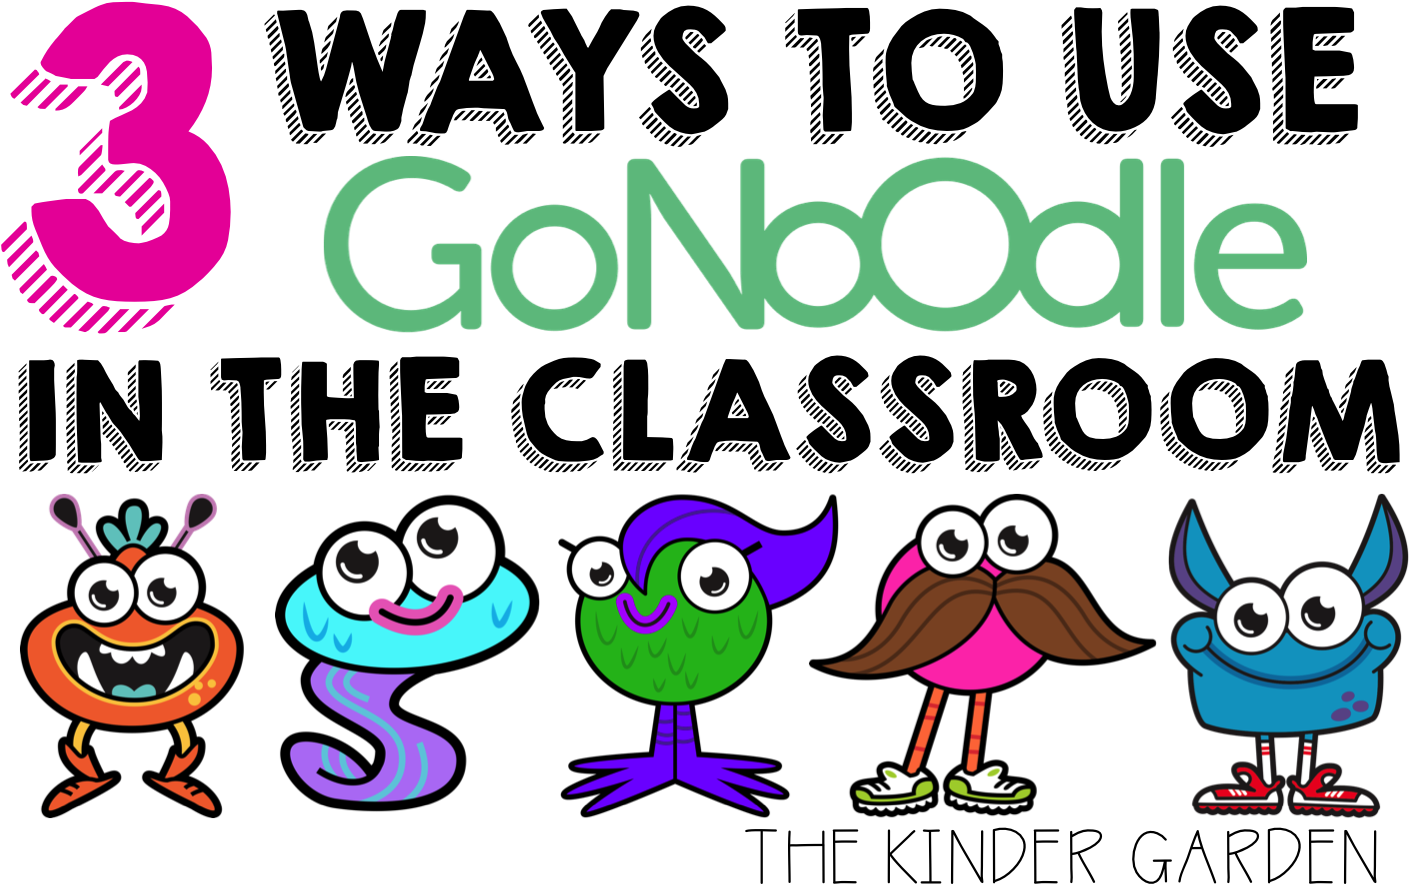 The First Way I'll Be Using Gonoodle In The Classroom - Cartoon (1466x1034)